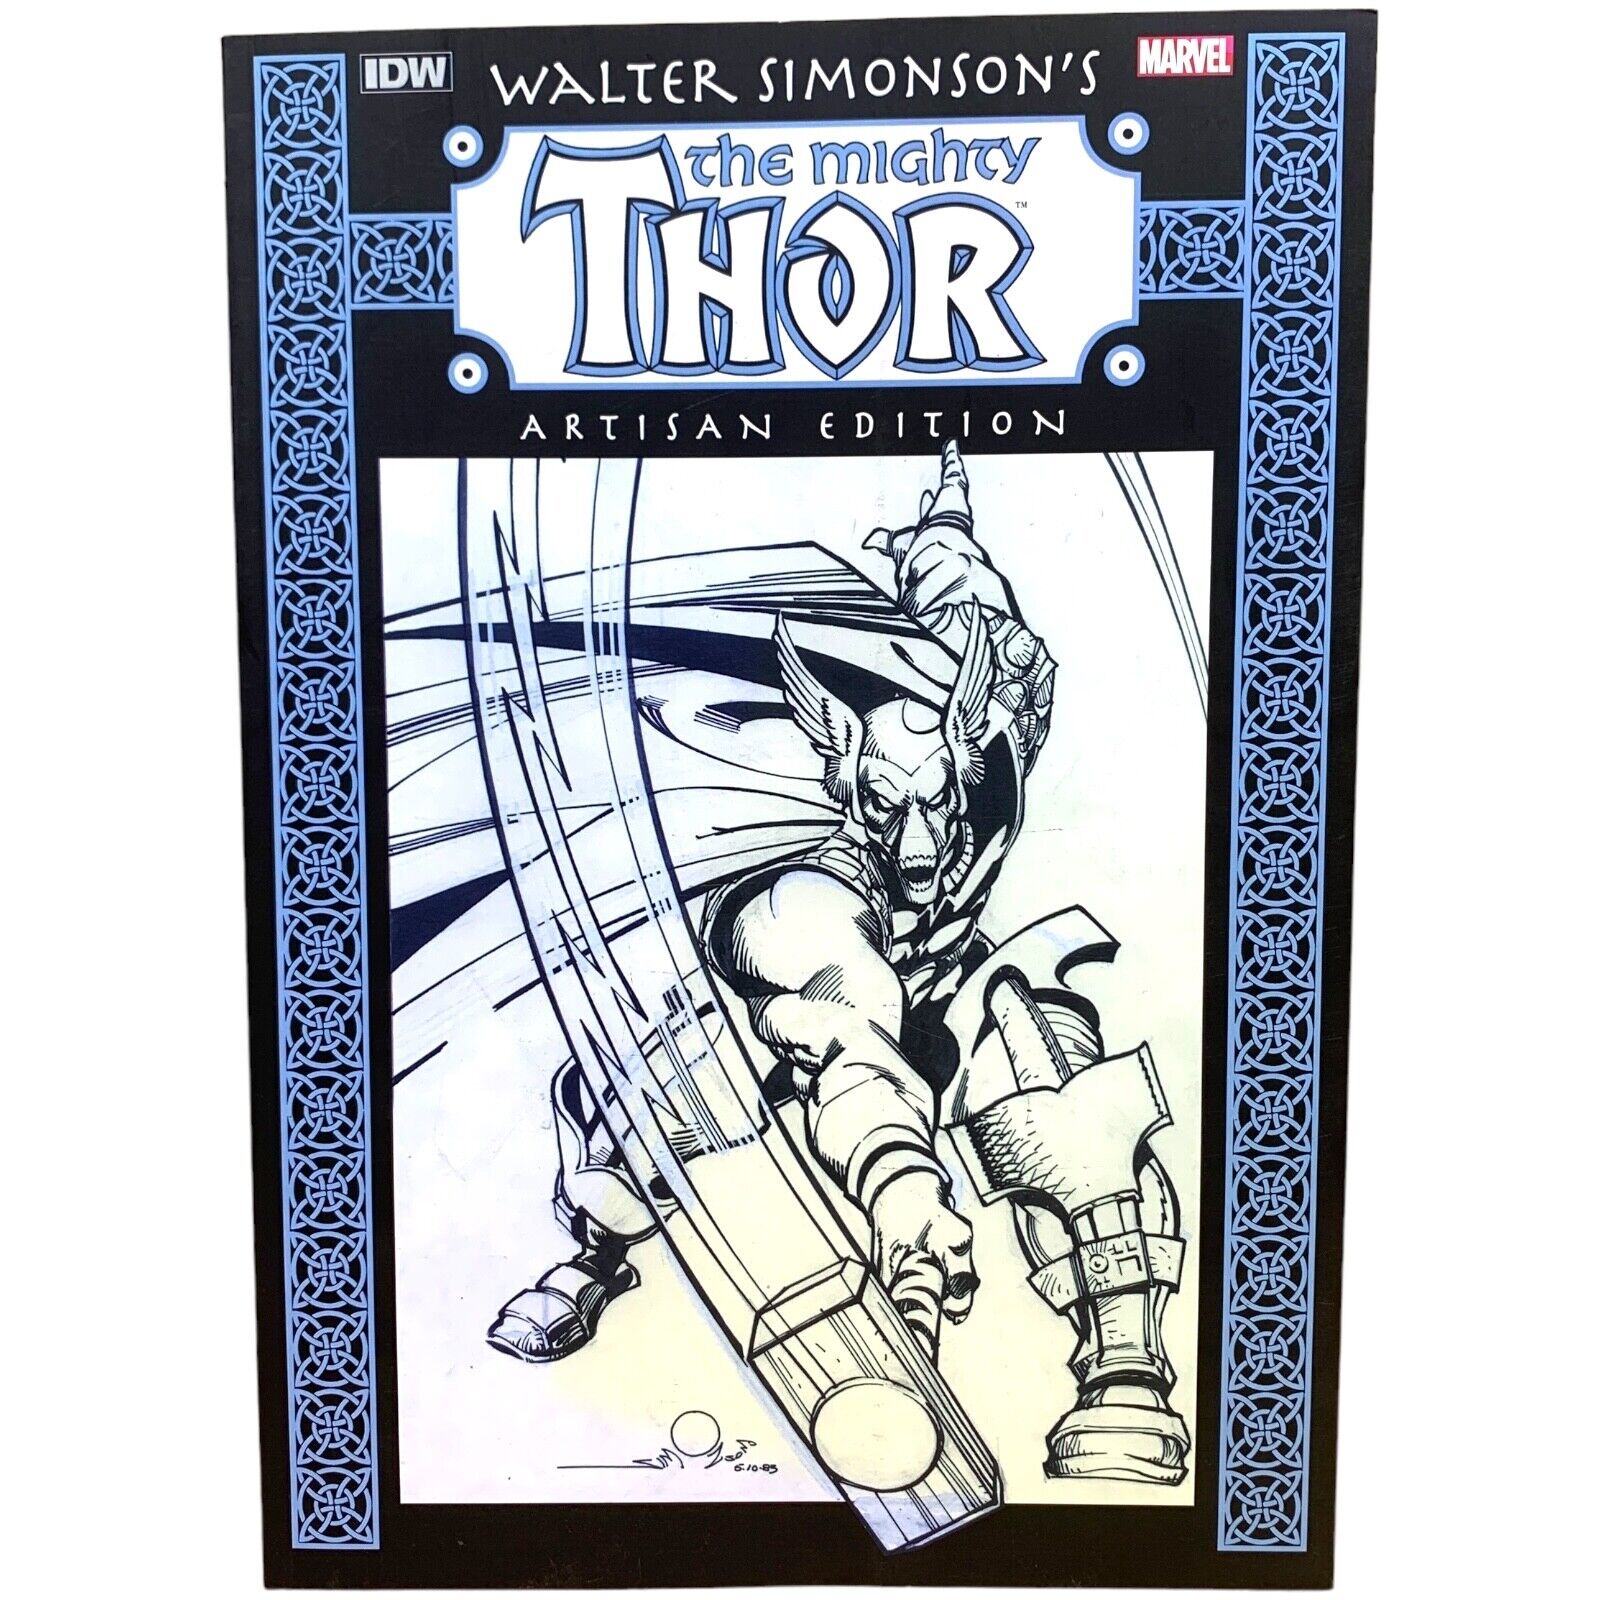 Walter Simonson's The Mighty Thor : Artisan Edition / Marvel Oversized Softcover